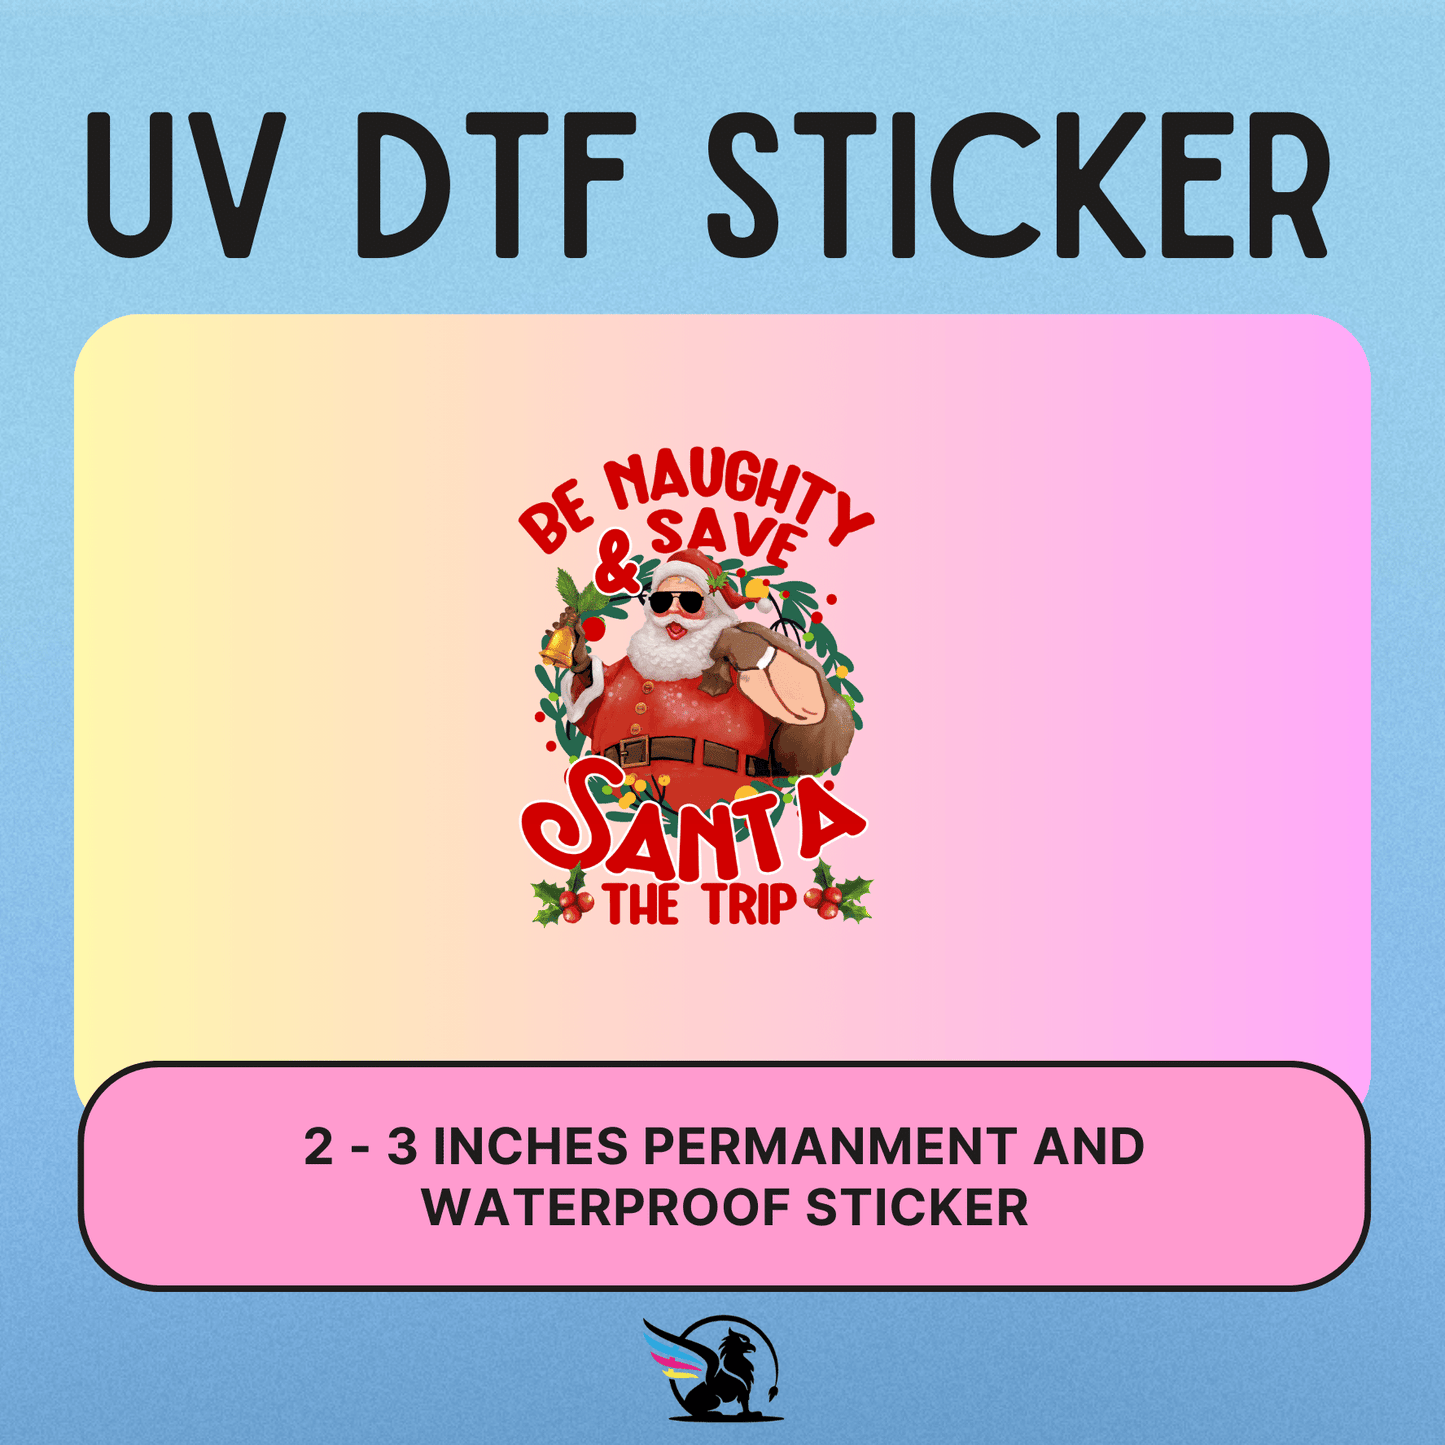 Be Naught And Save Santa The Trip | UV DTF STICKER